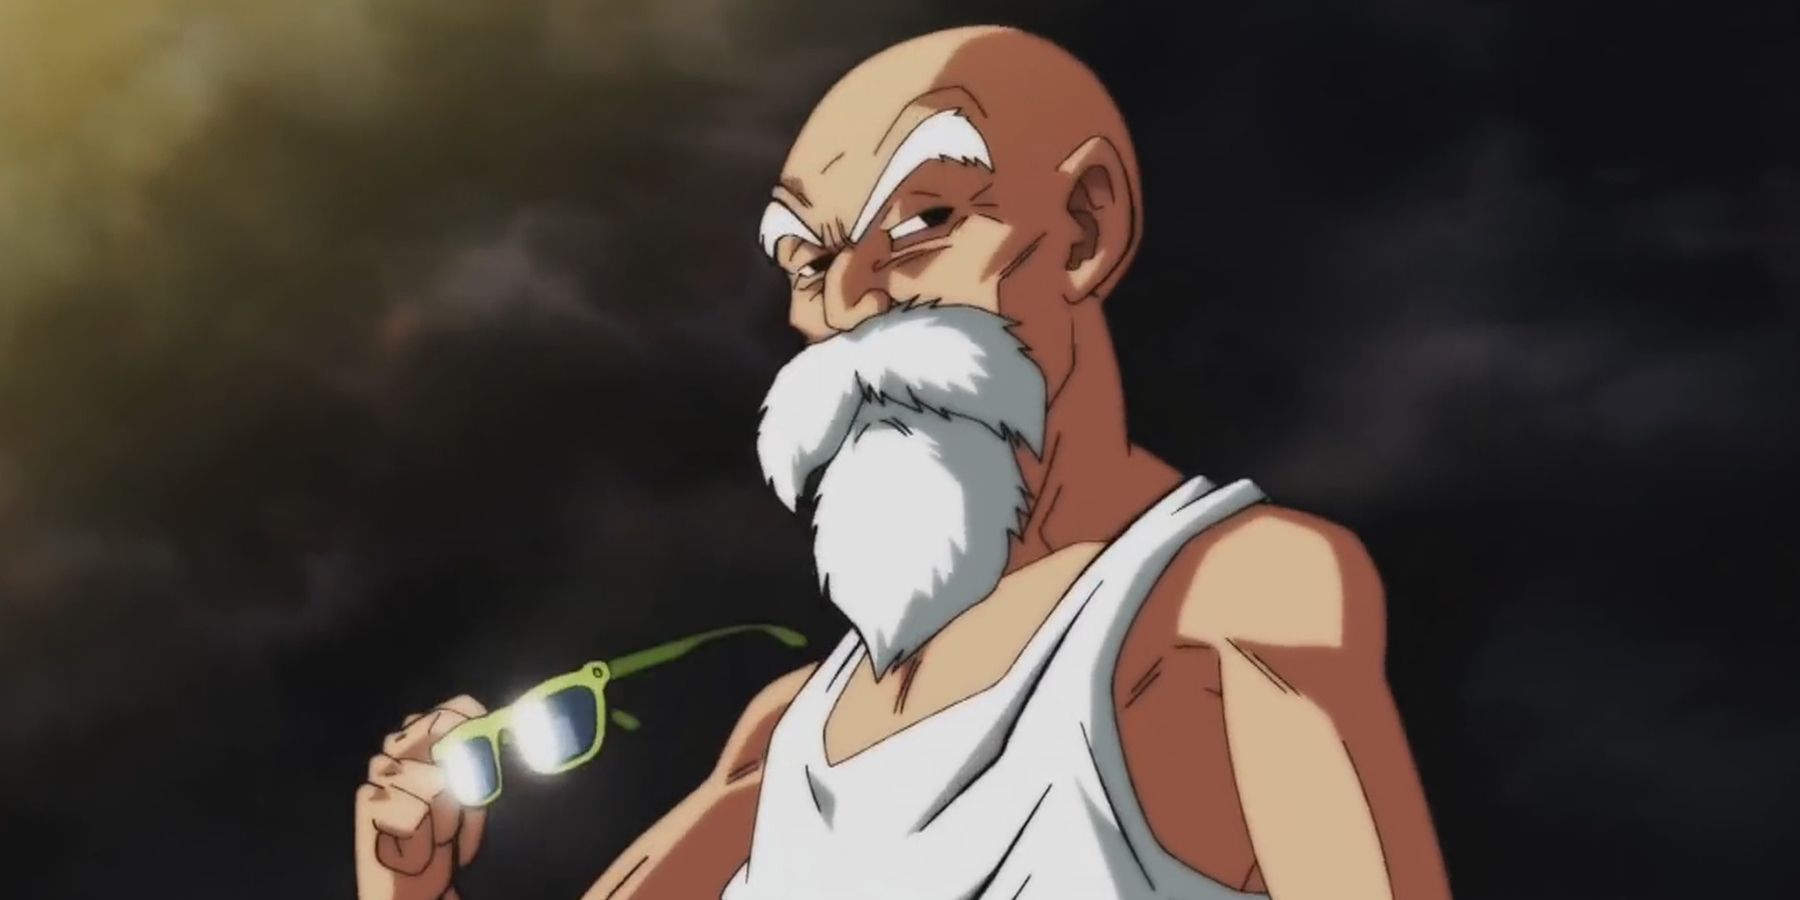 Master Roshi ready to battle in the Tournament of Power in Dragon Ball Super